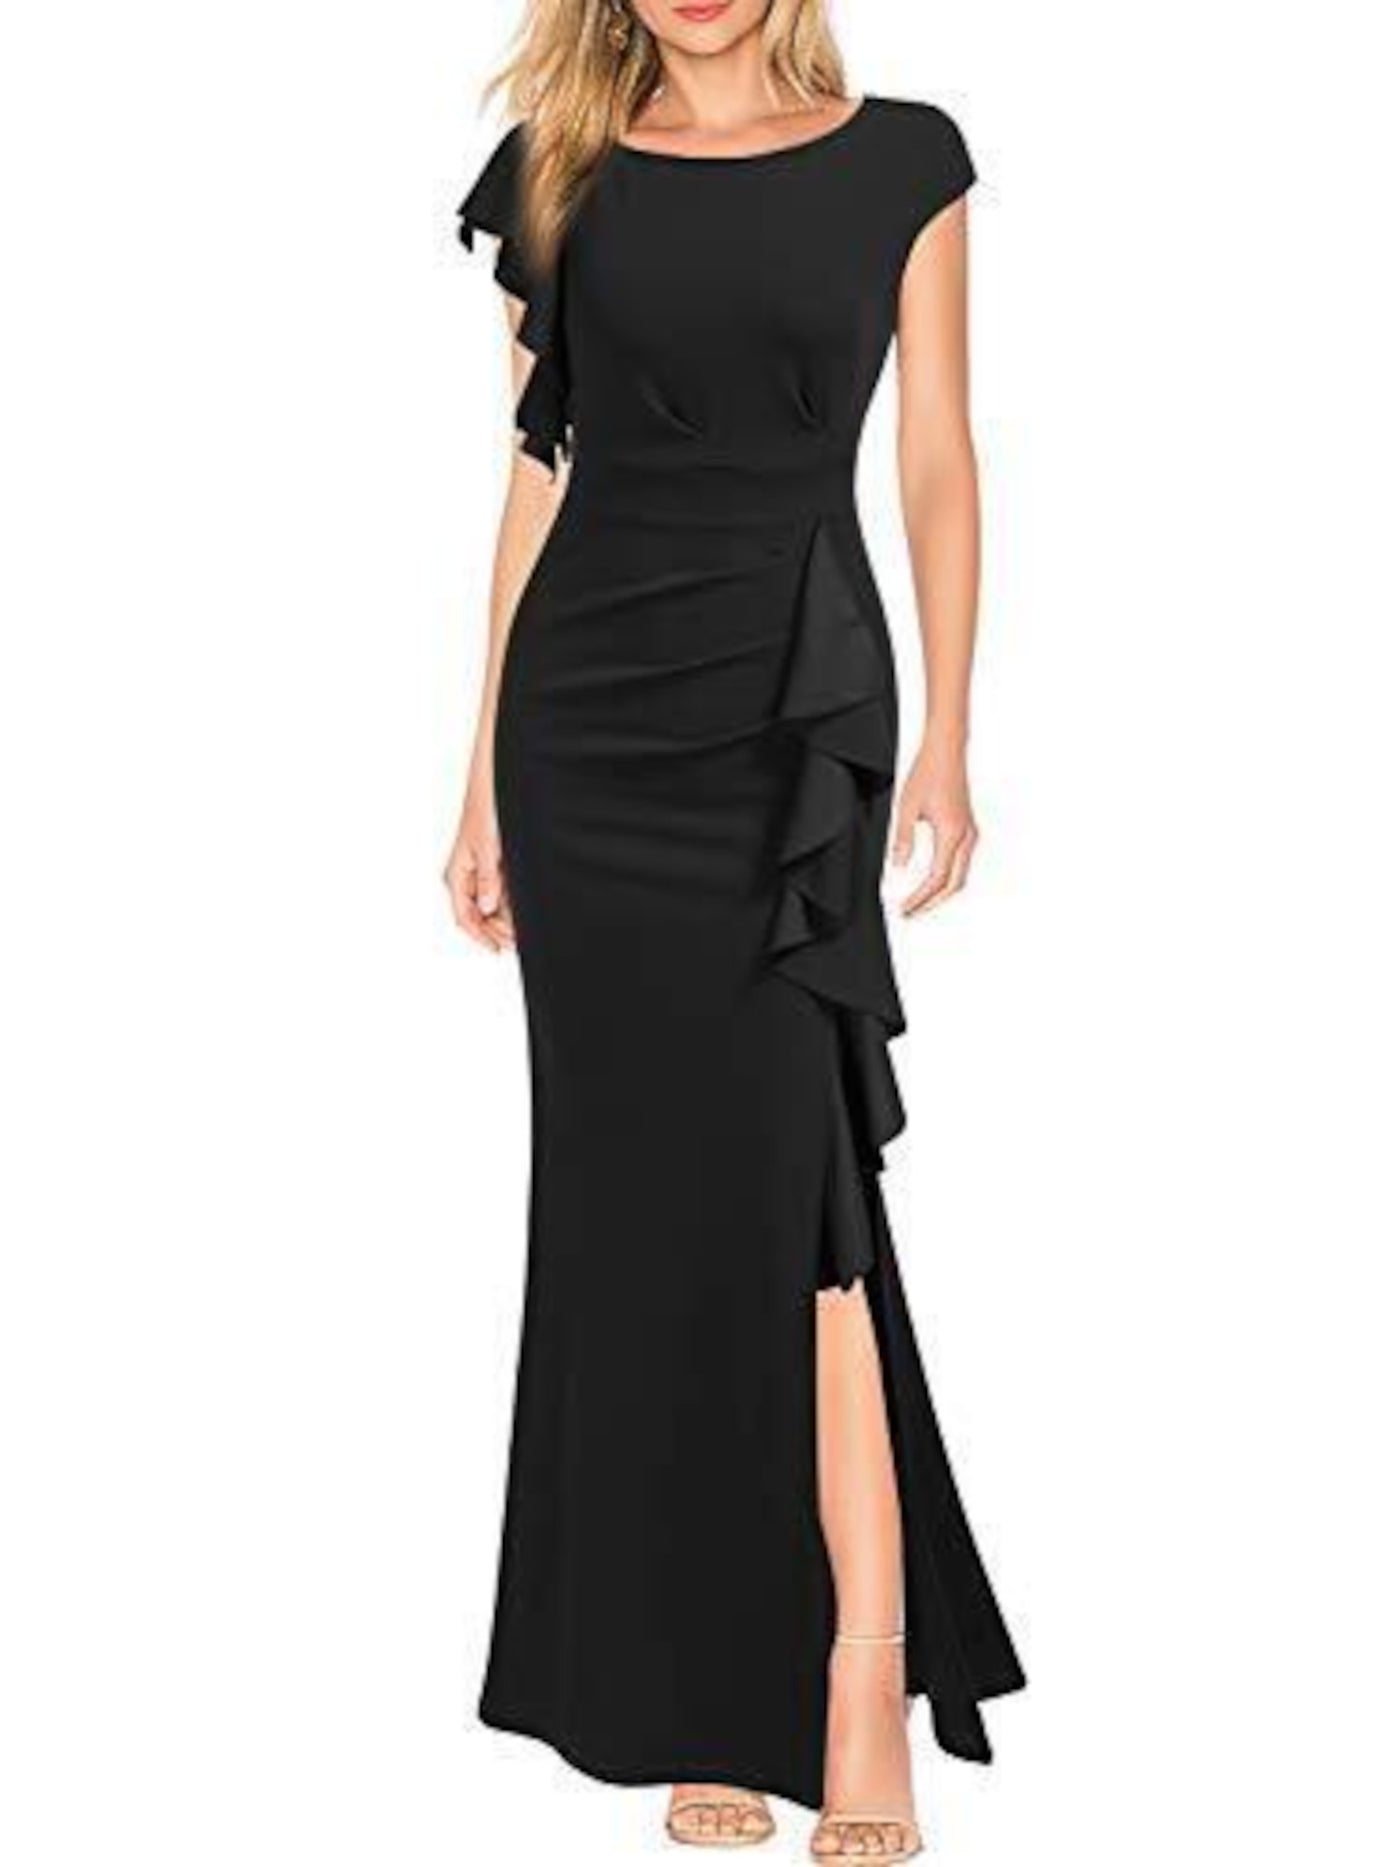 WOOSEA Womens Black Pleated Zippered Slitted Cascading Ruffle Flutter Sleeve Round Neck Full-Length Evening Body Con Dress S